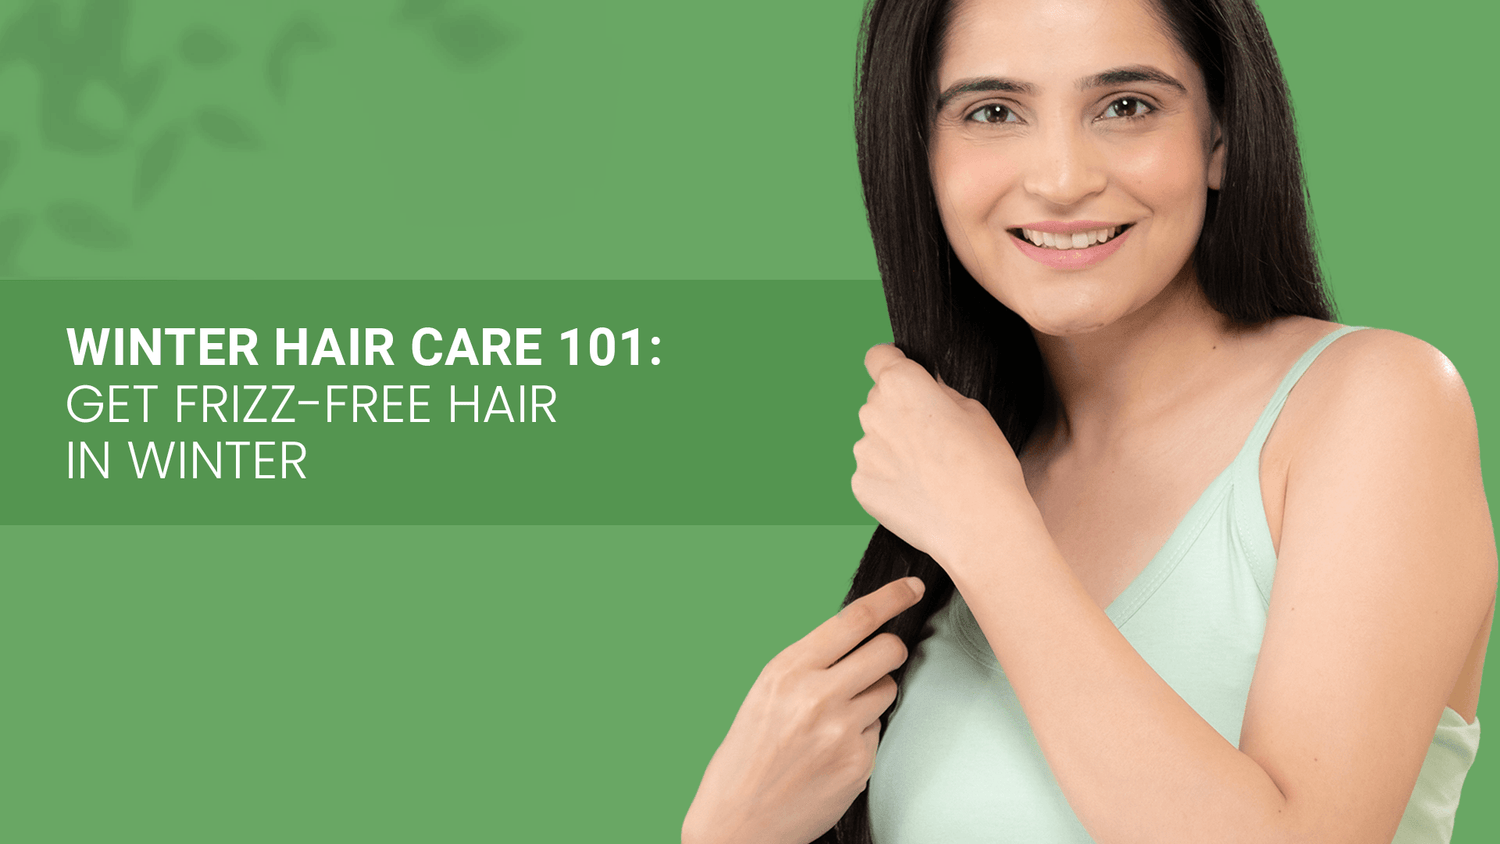 Winter Hair care 101: Get Frizz-free Hair in Winters - La Pink